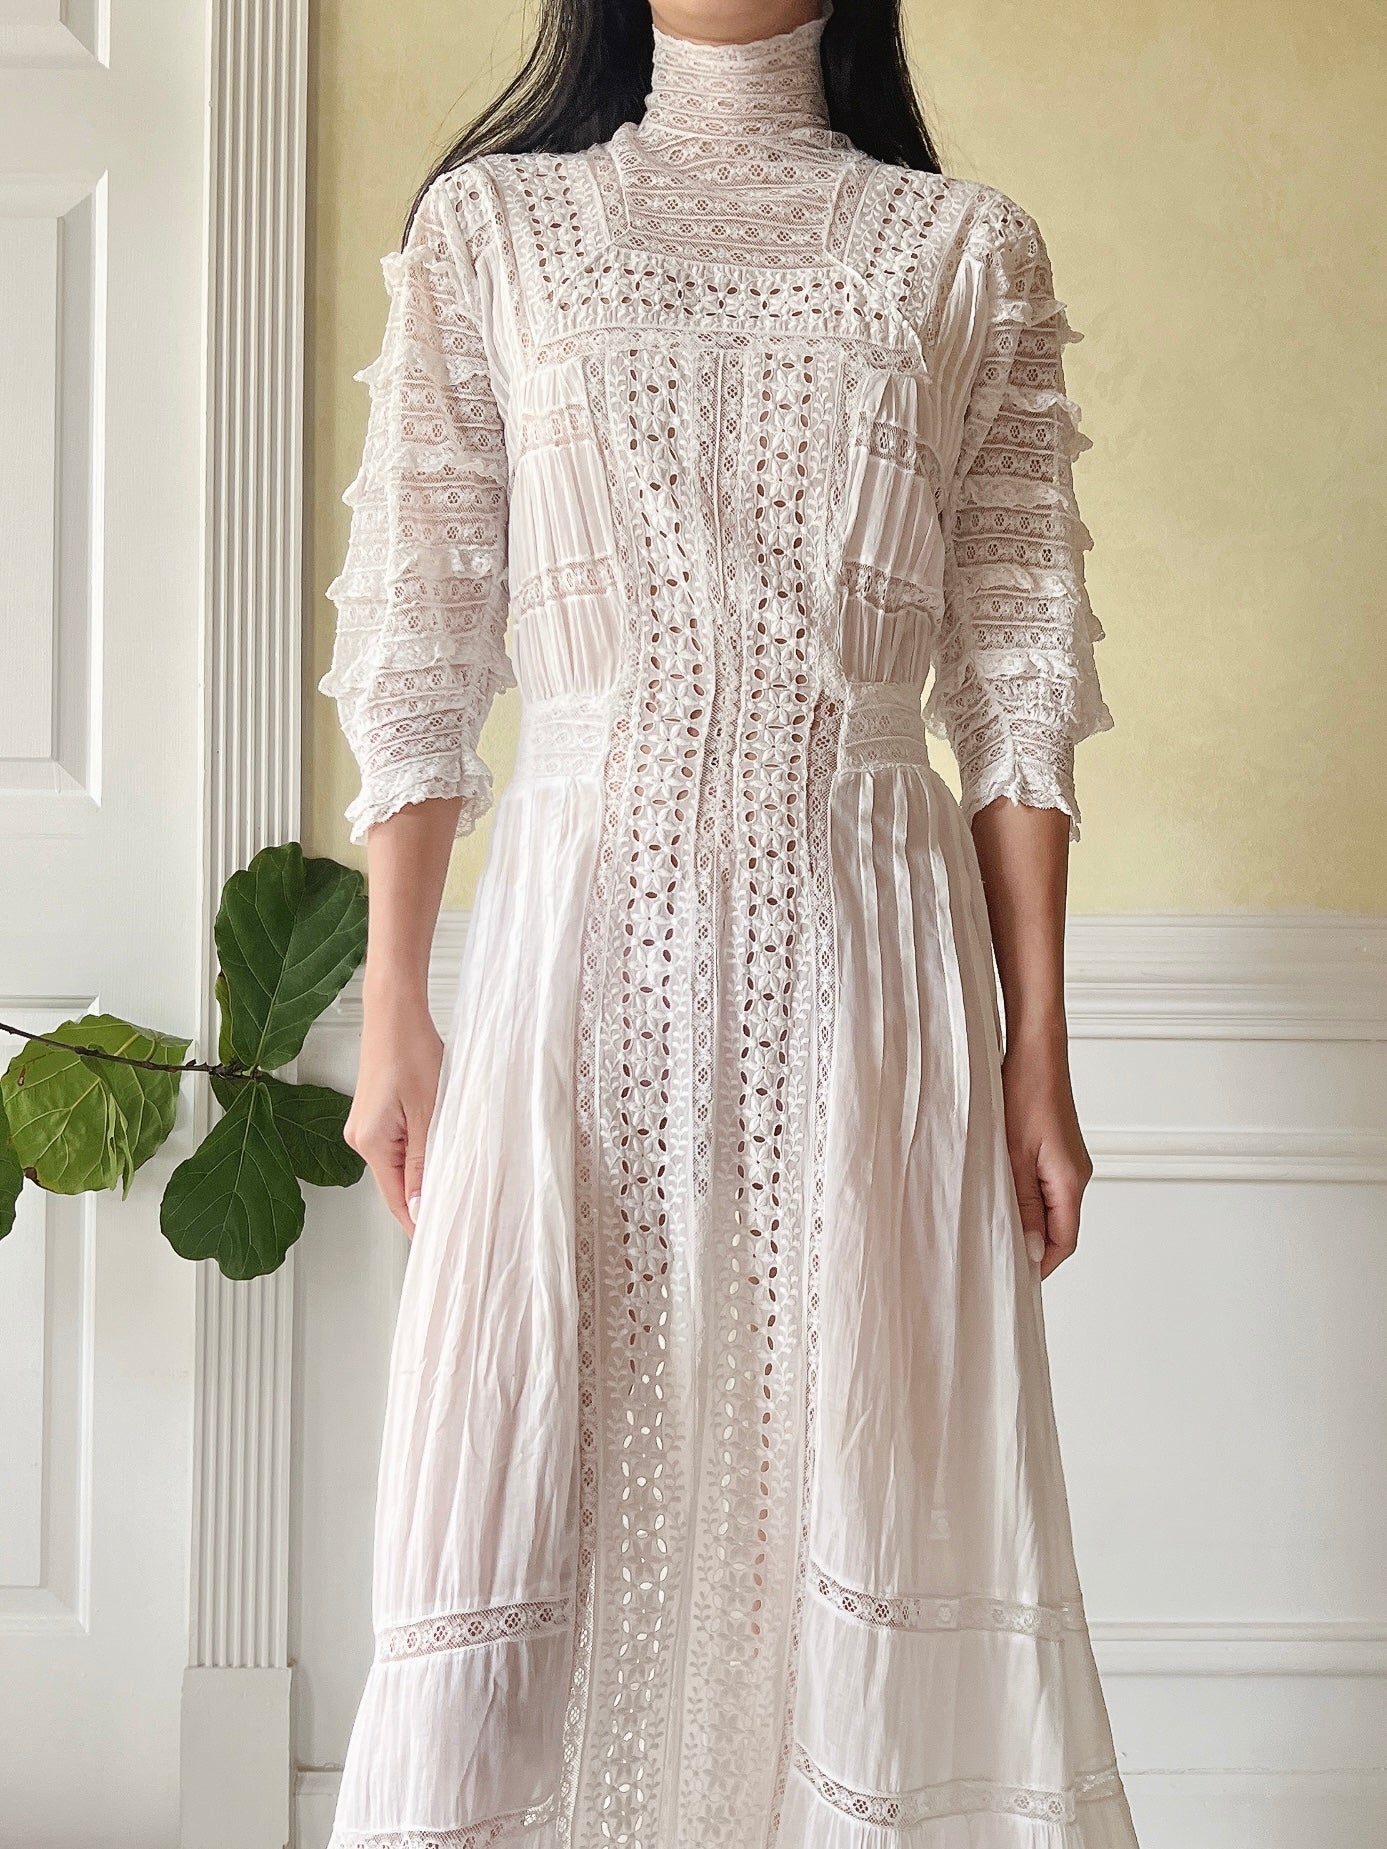 Victorian Cotton Lace and Embroidered Dress - XS